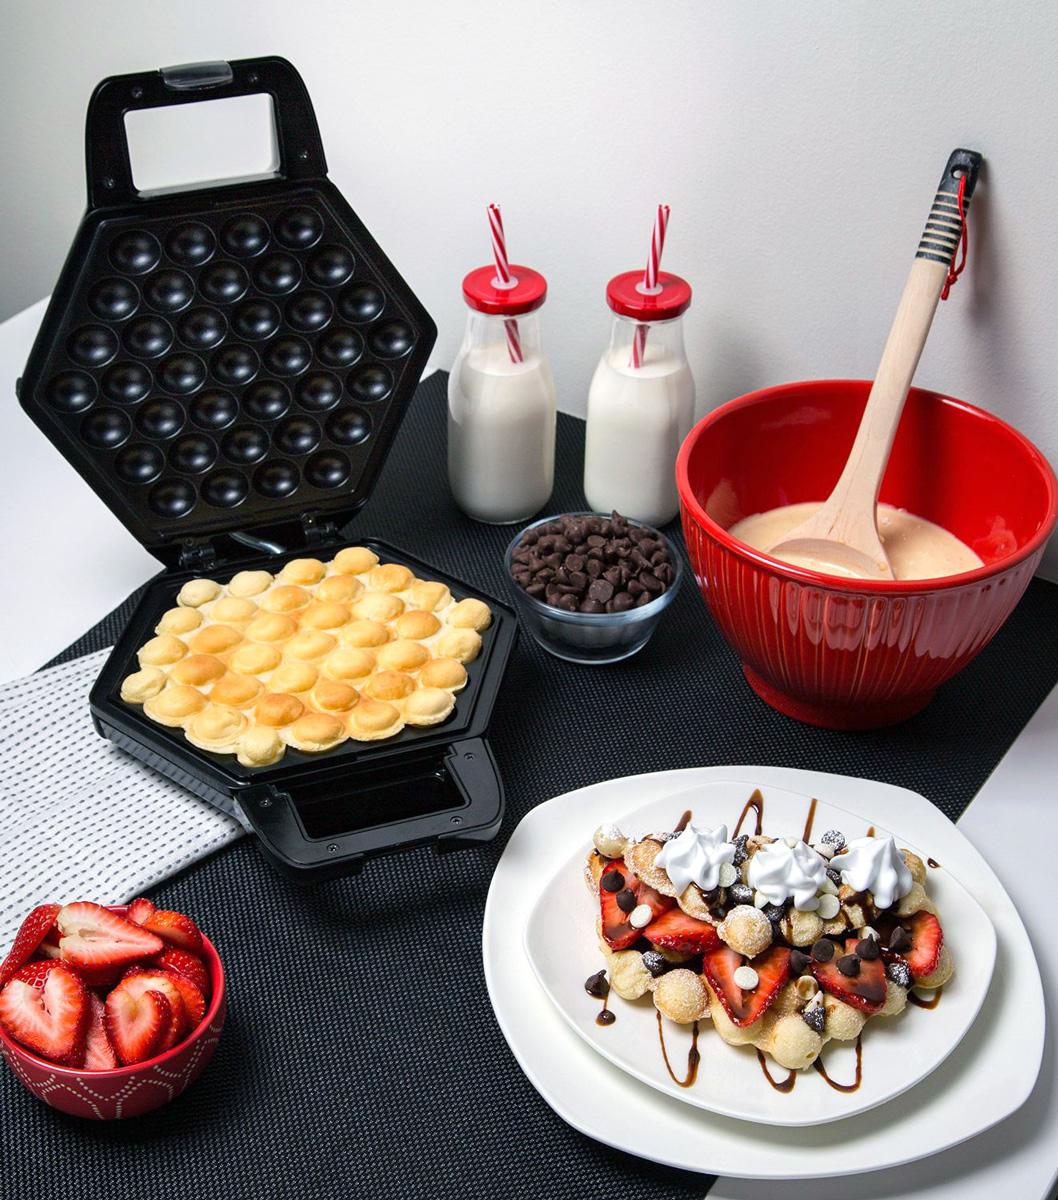 Muffin Egg Hong Kong Style Cake Eggettes and Belgian Bubble Waffles SIERINO Bubble Puffle Waffle Maker Professional Rotated Nonstick Eggettes Waffle Baker Grill/Oven for Puff